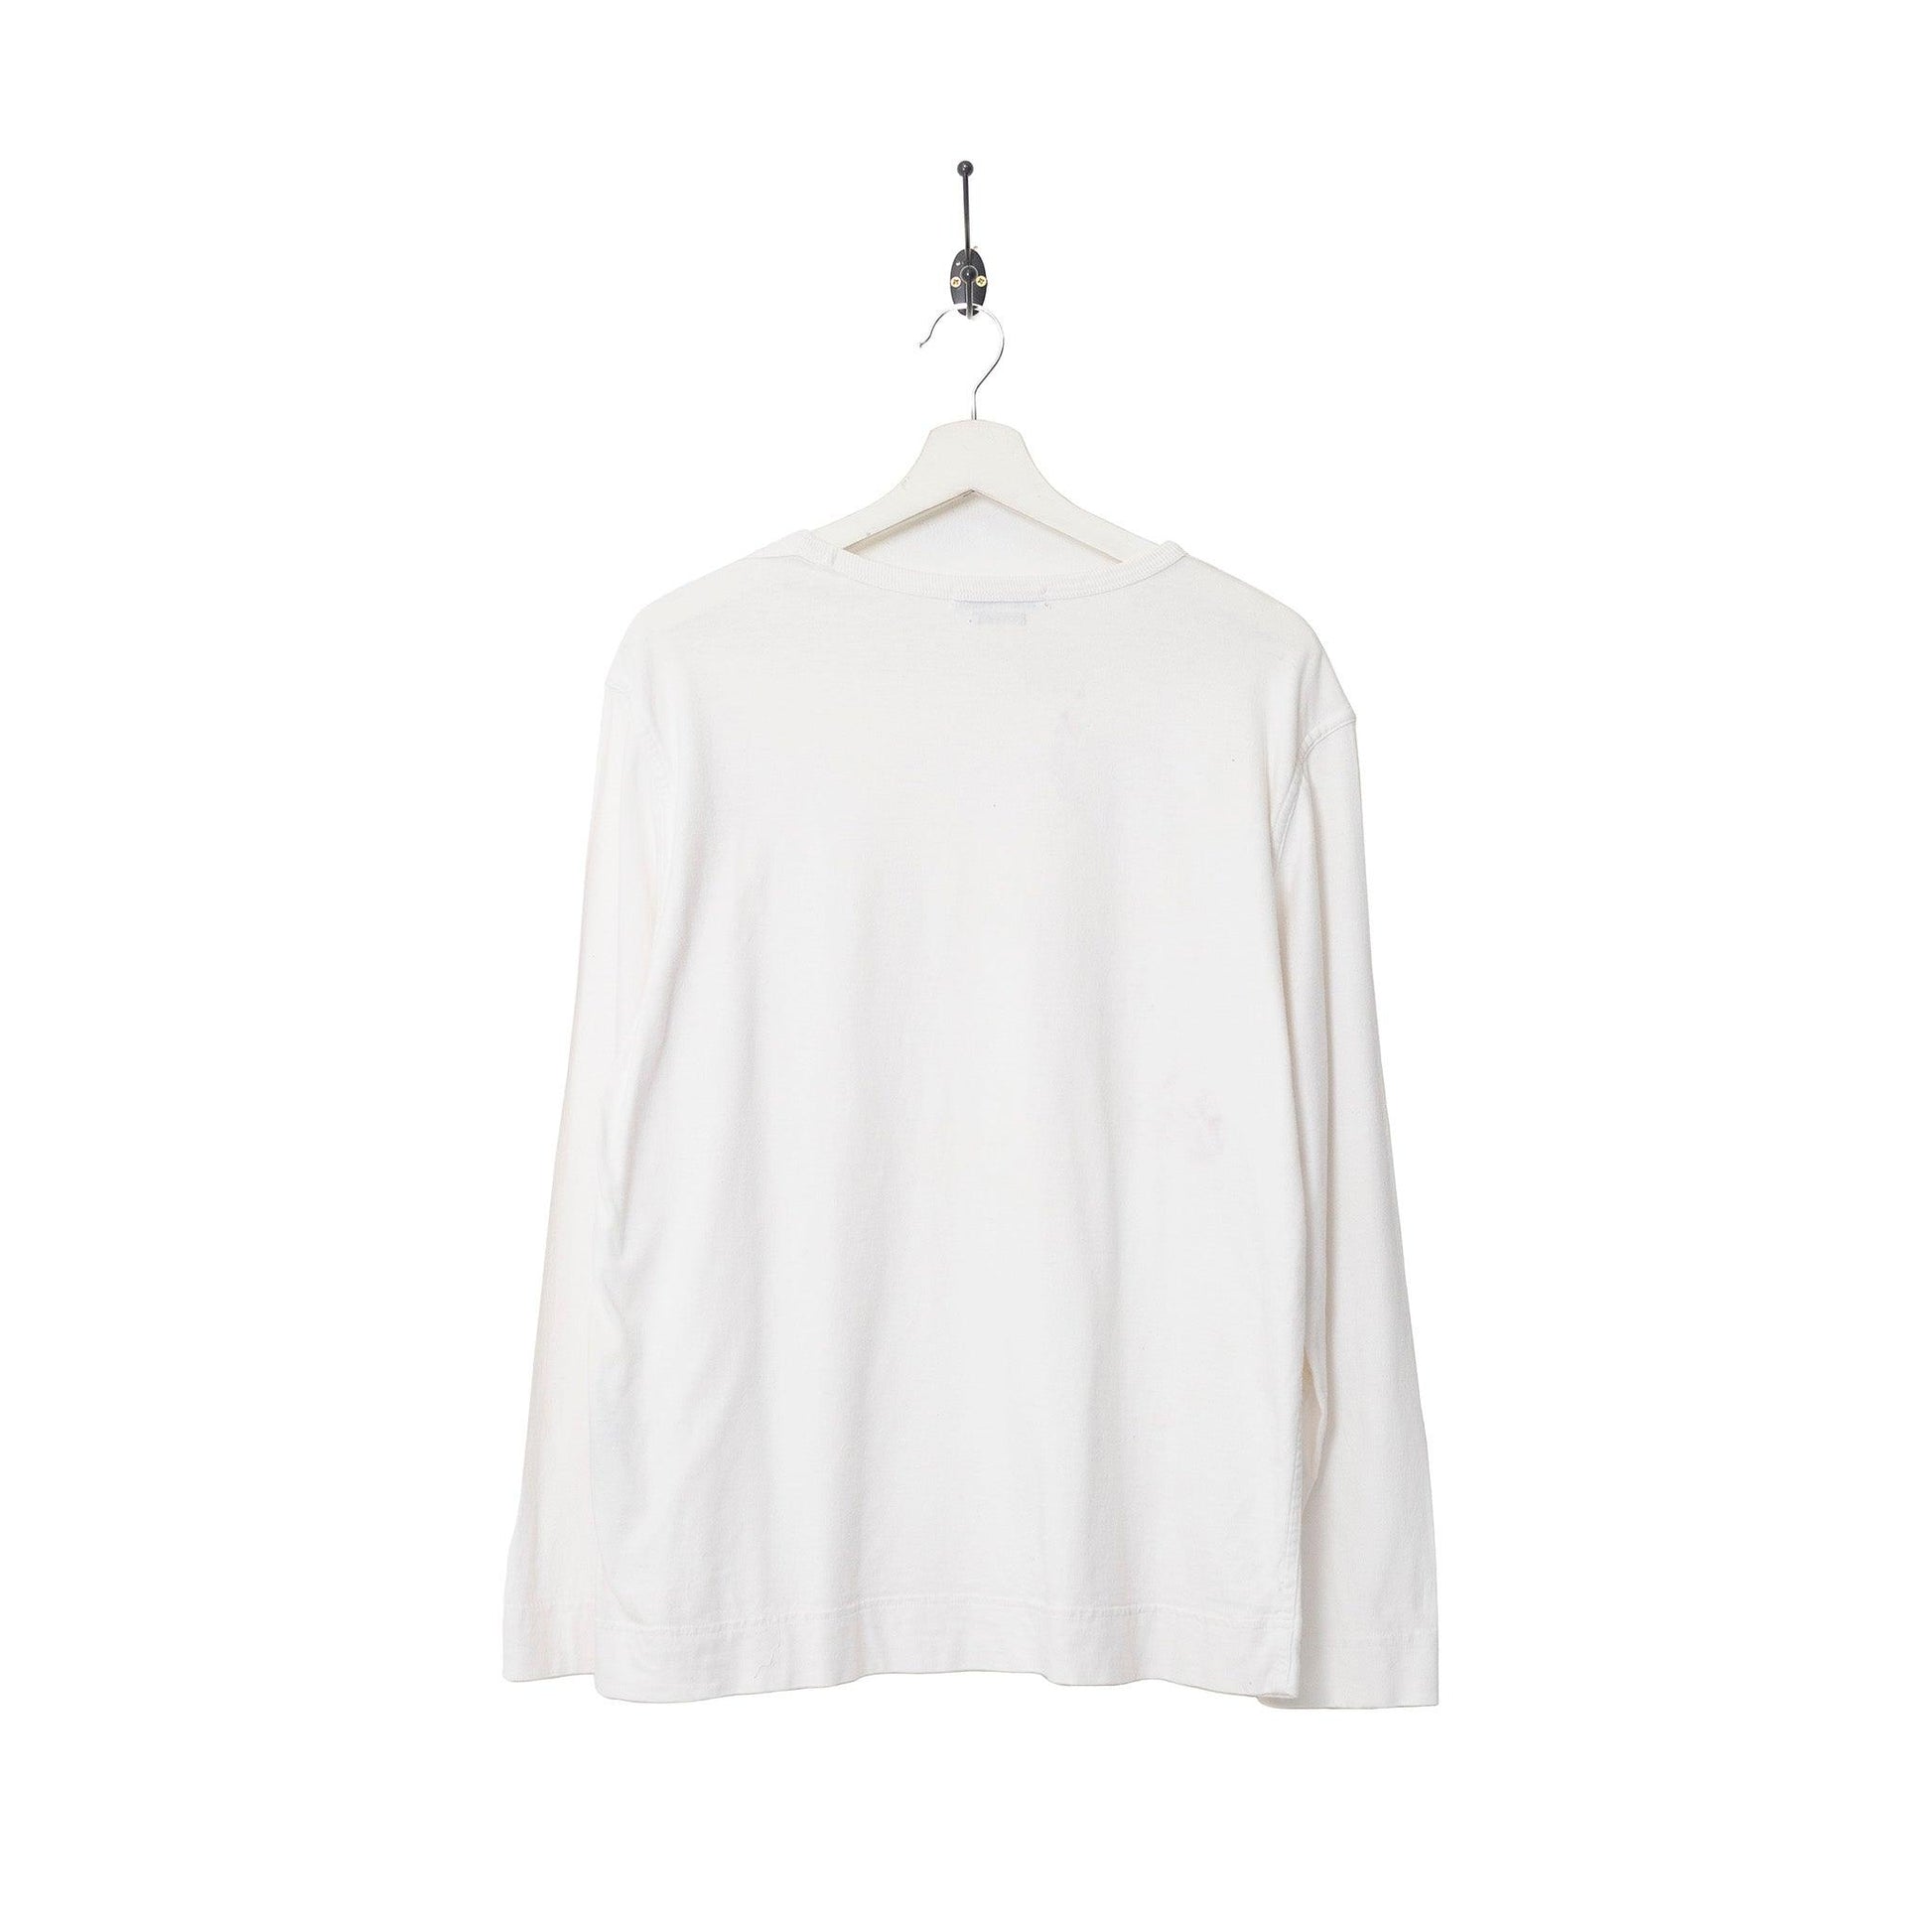 Stone Island S/S 2000 Whiteout Sweater - Known Source